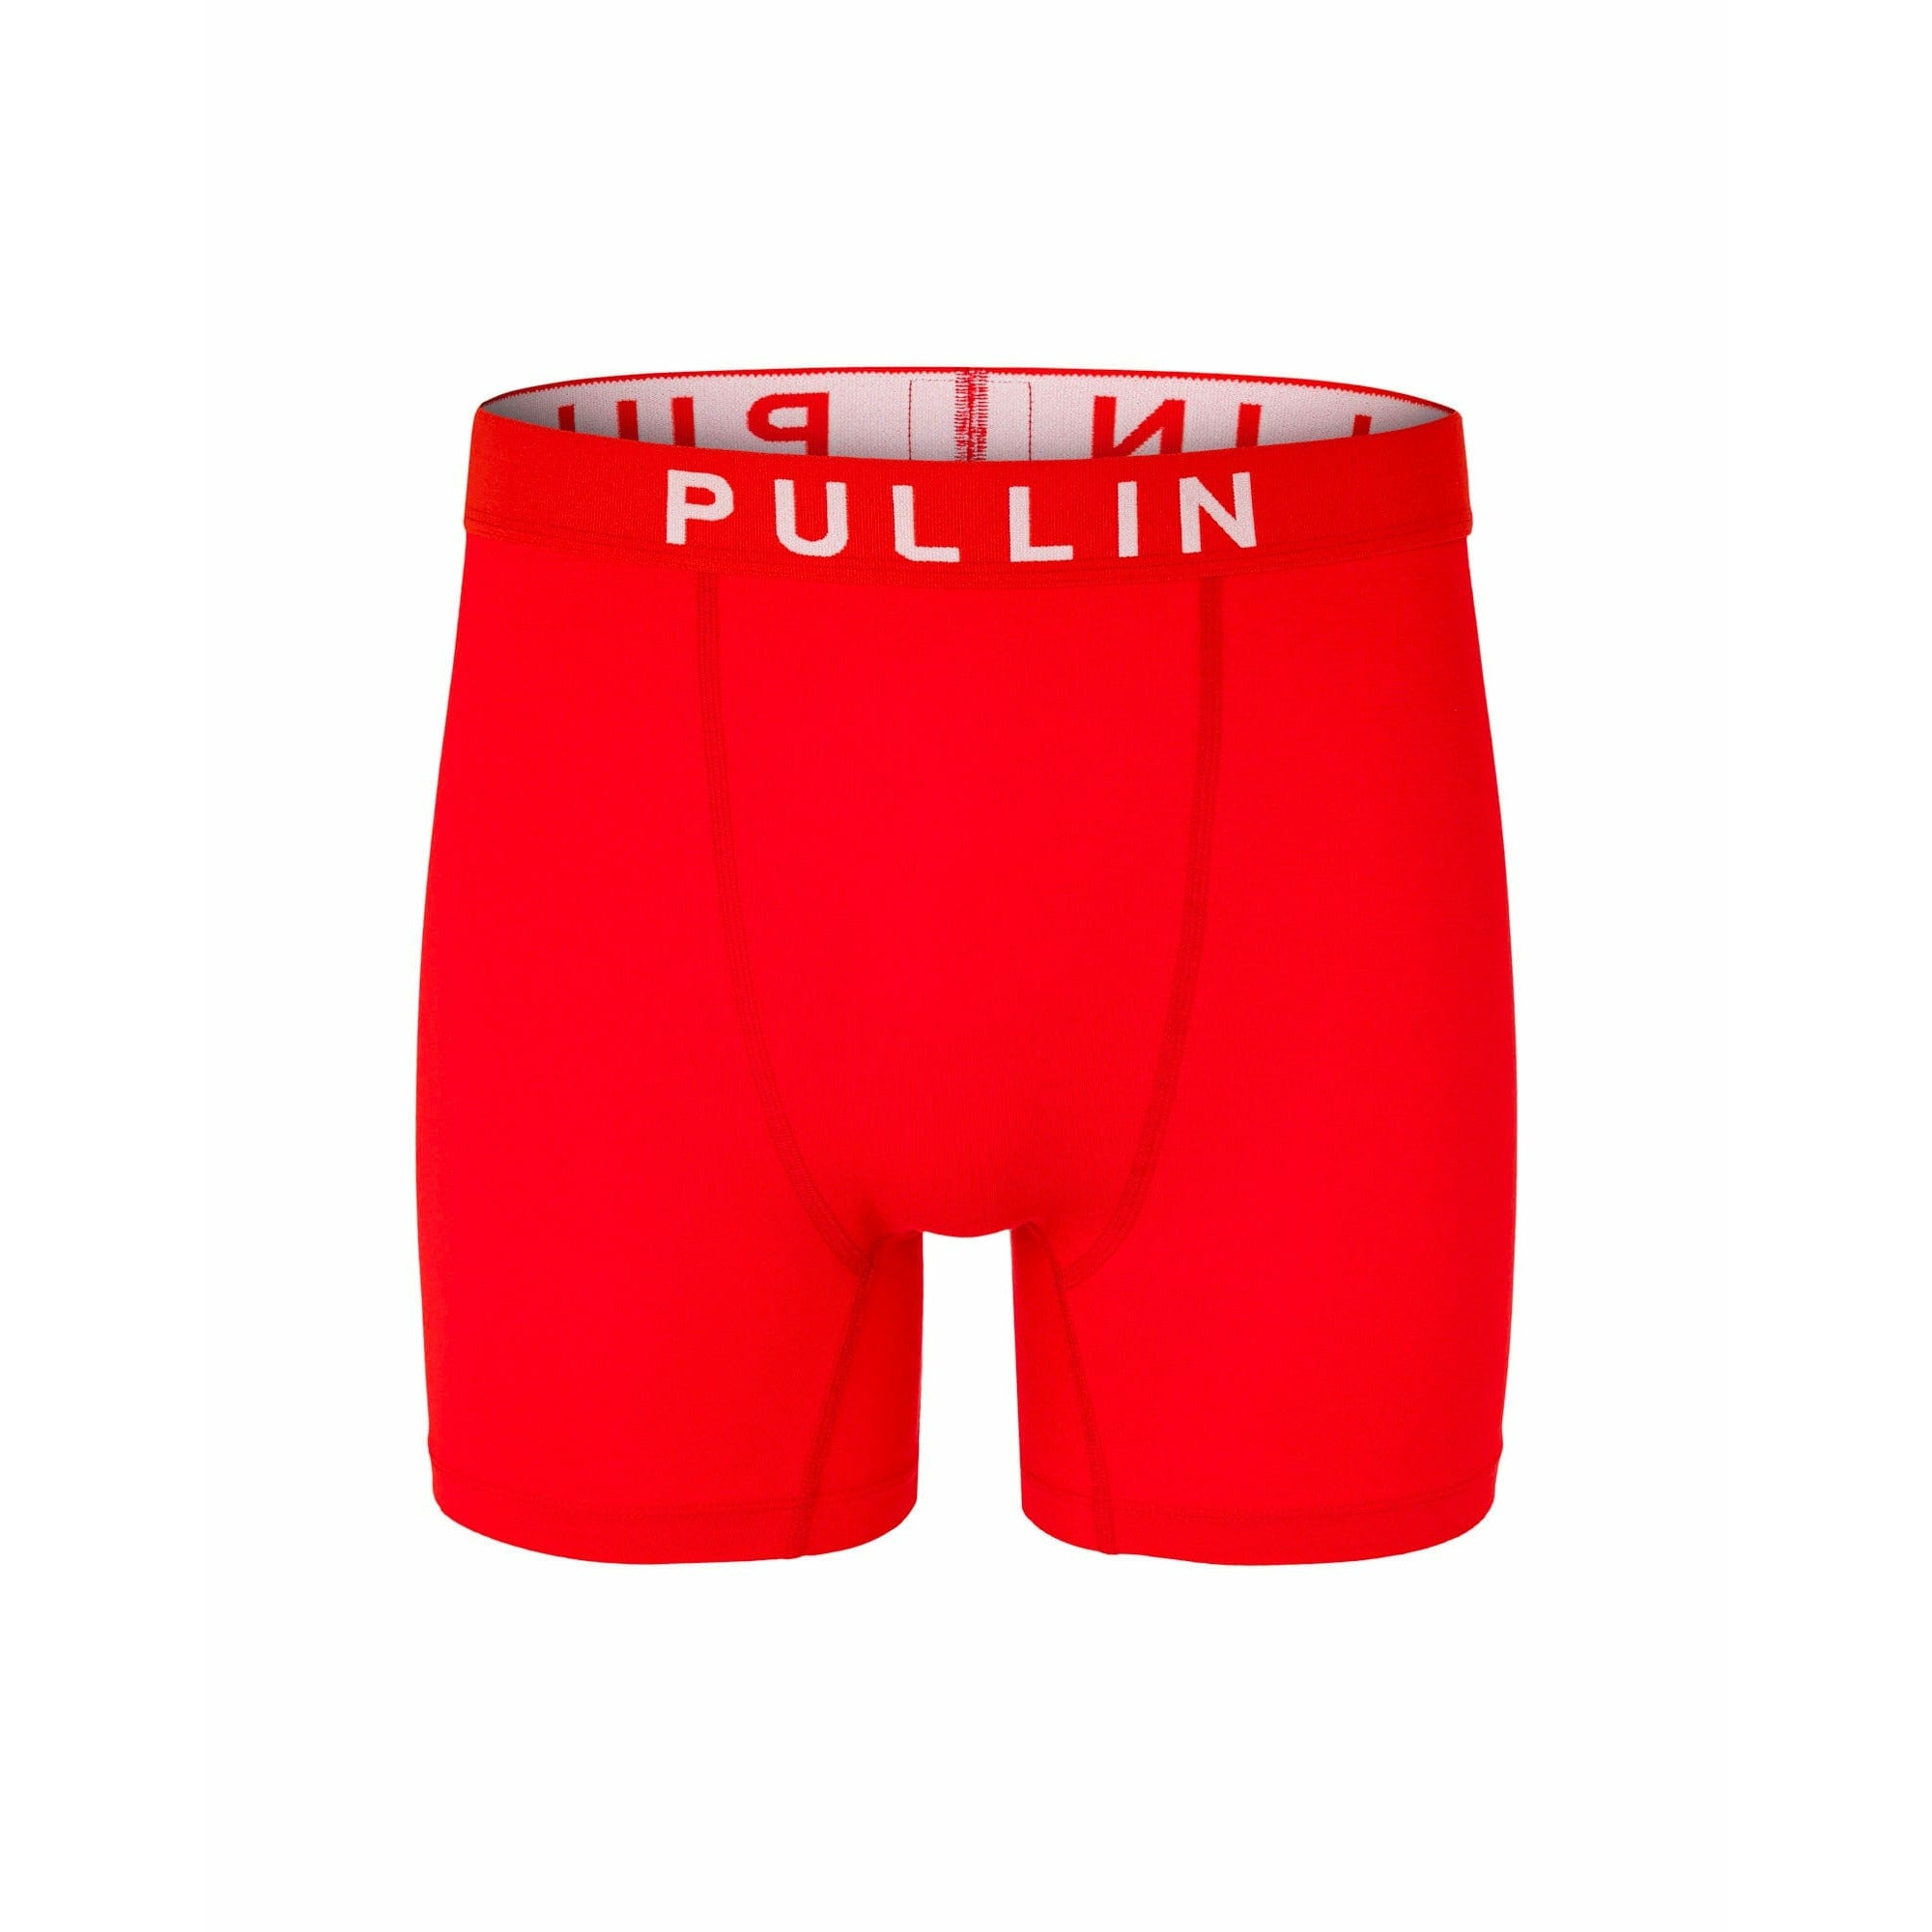 Pullin Red / S Fashion 2 Red21 Boxer Brief